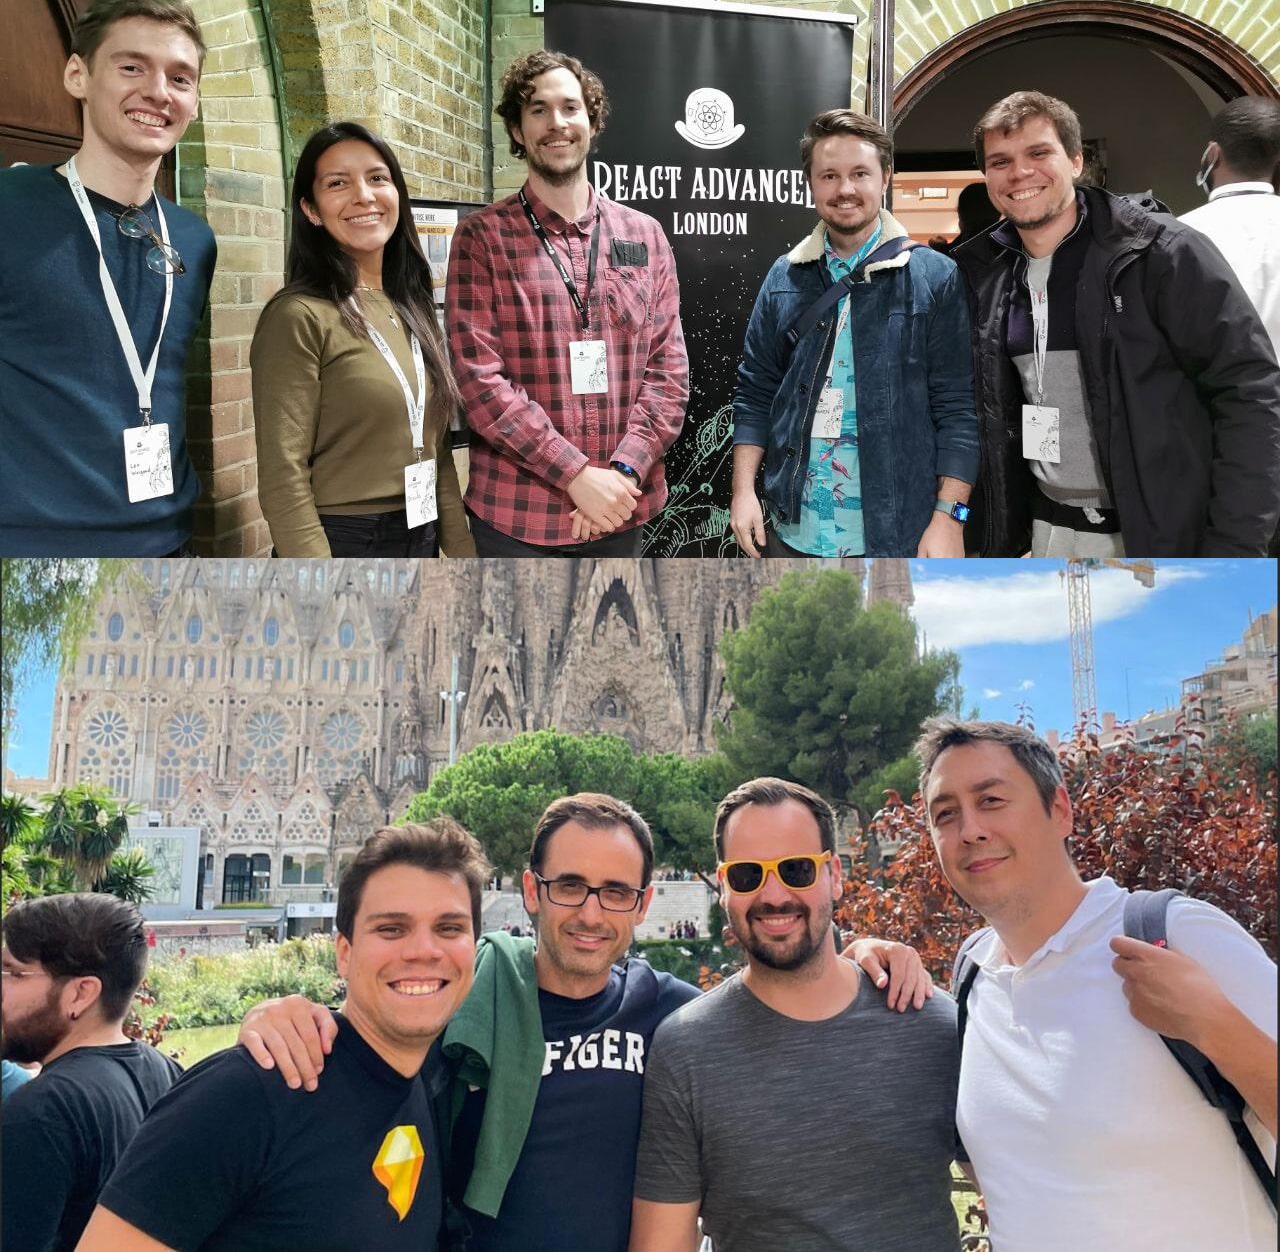 On top, Myself and my team in London for the React Advanced conference. Below in Barcelona with some team members.